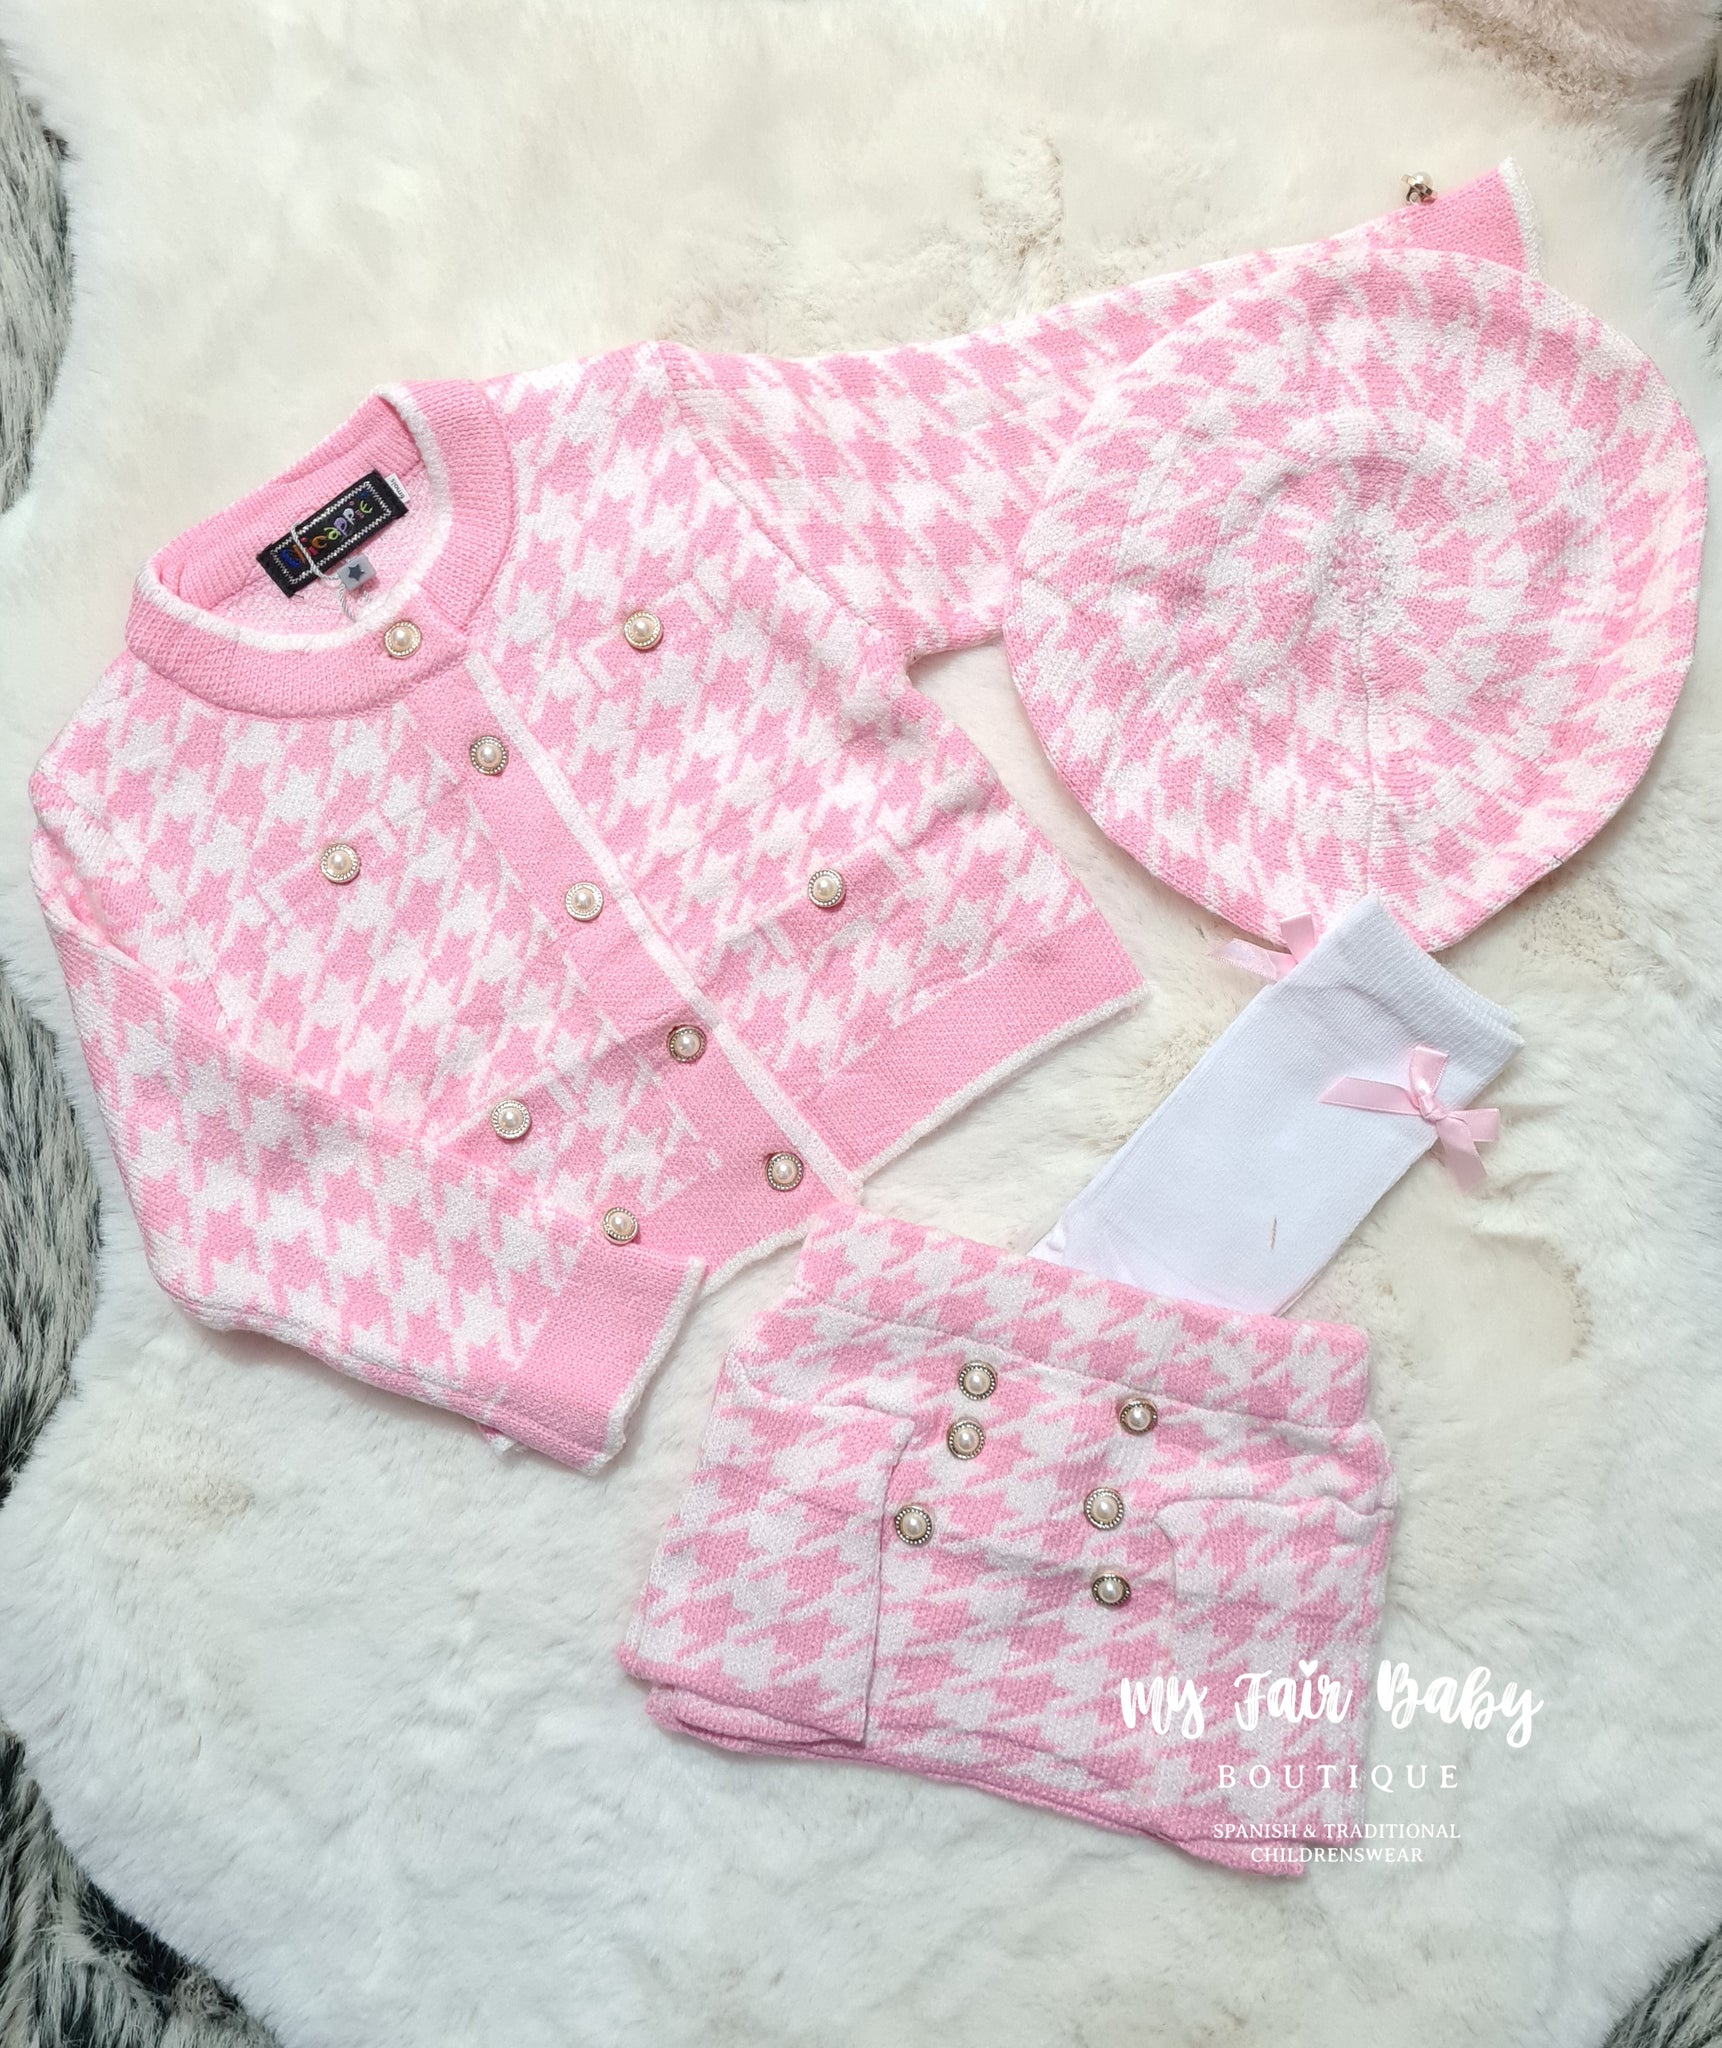 Traditional Baby Girls Pink & White 4PC Knitted Skirt & Jacket Set - 24m